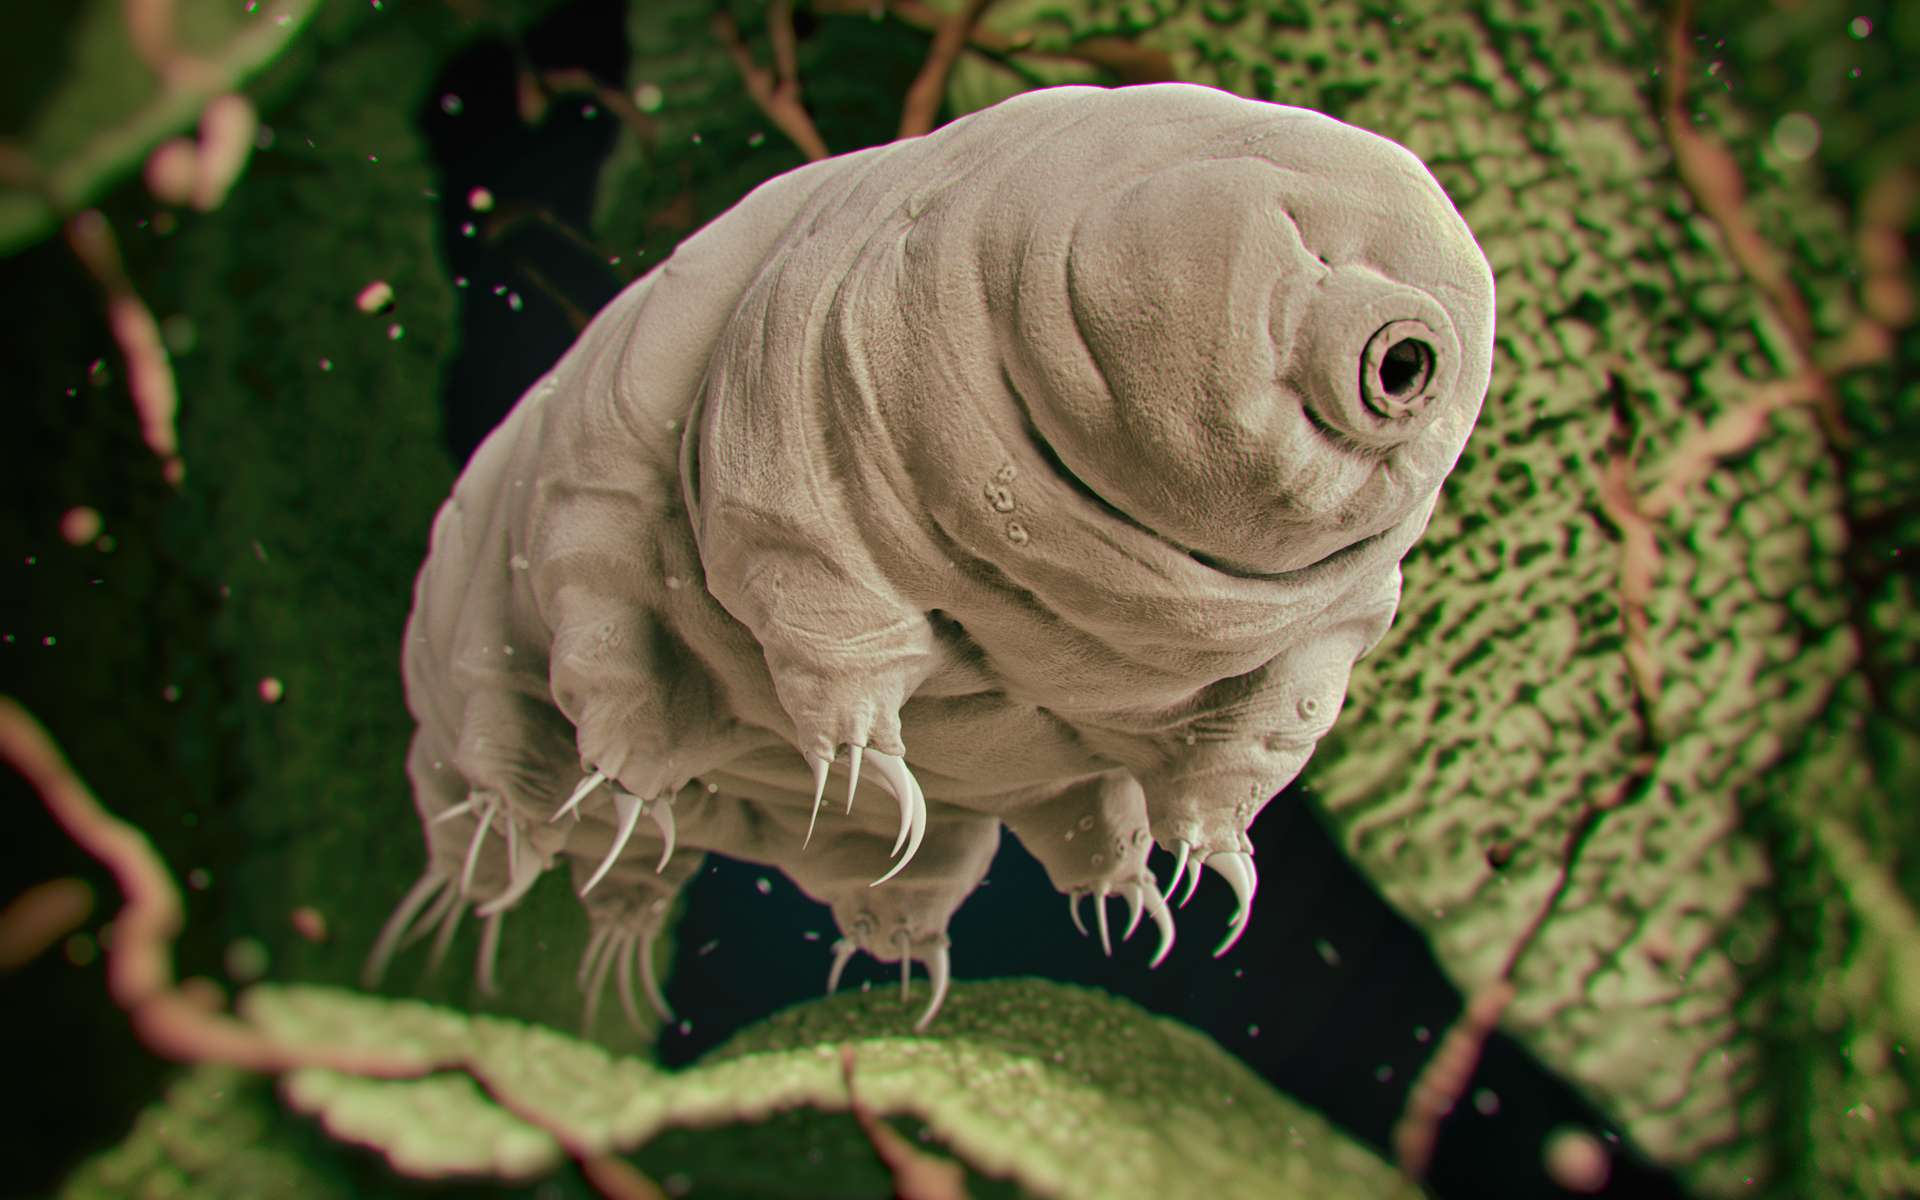 We know why tardigrades survive dehydration